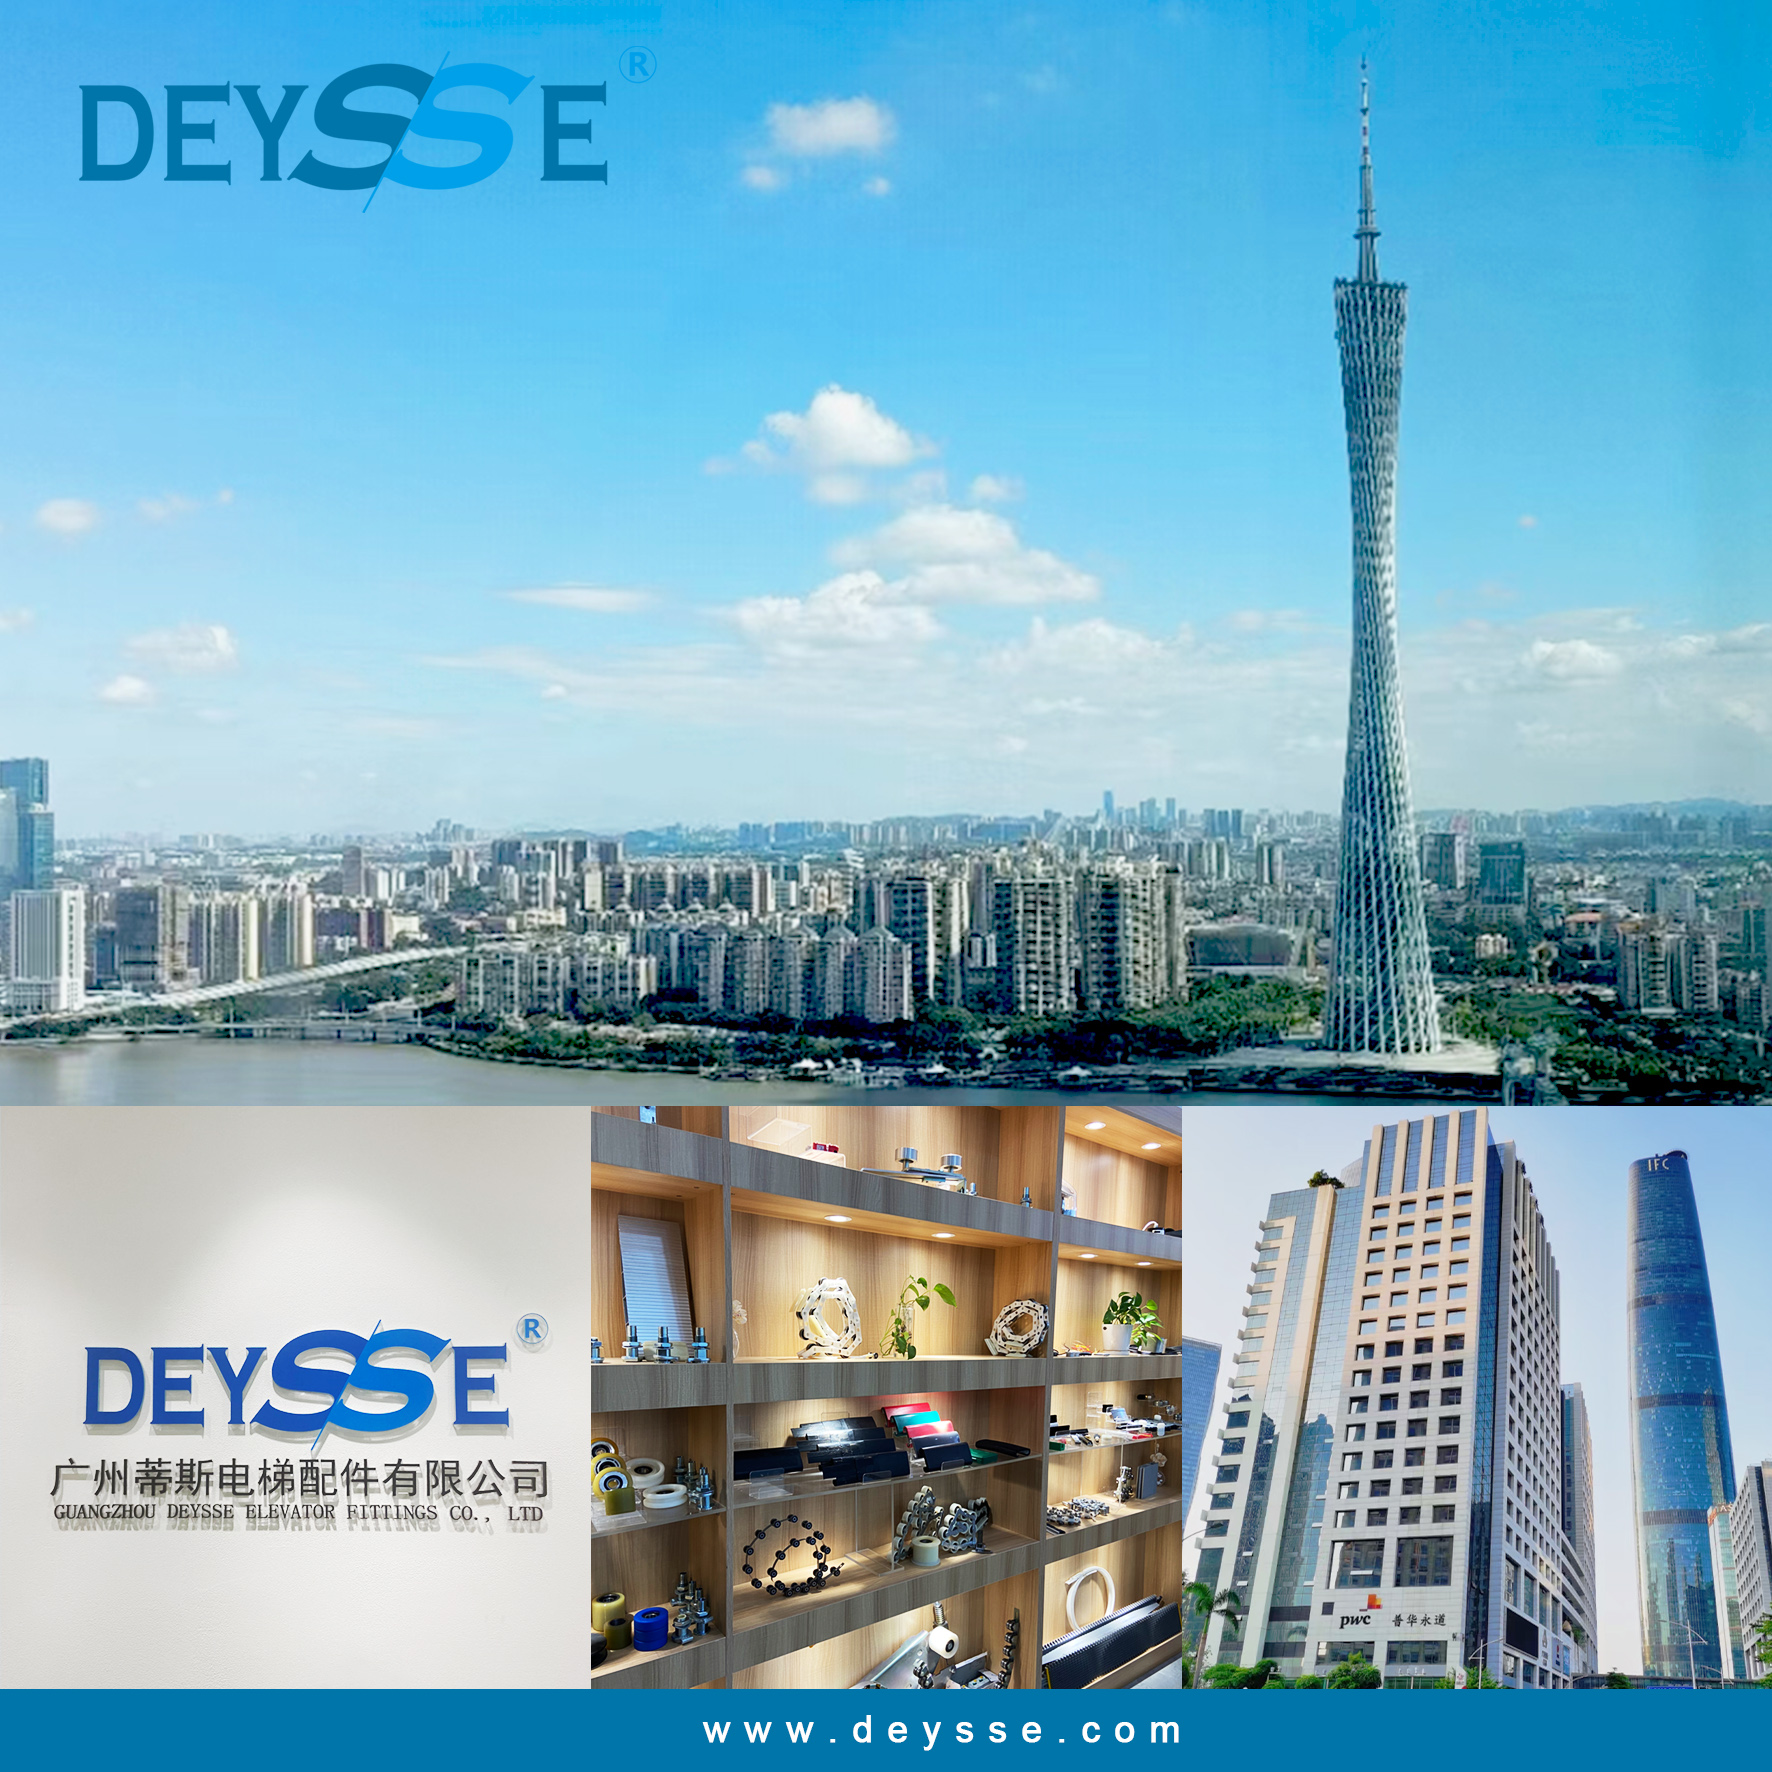 Our modern office is in Guangzhou.